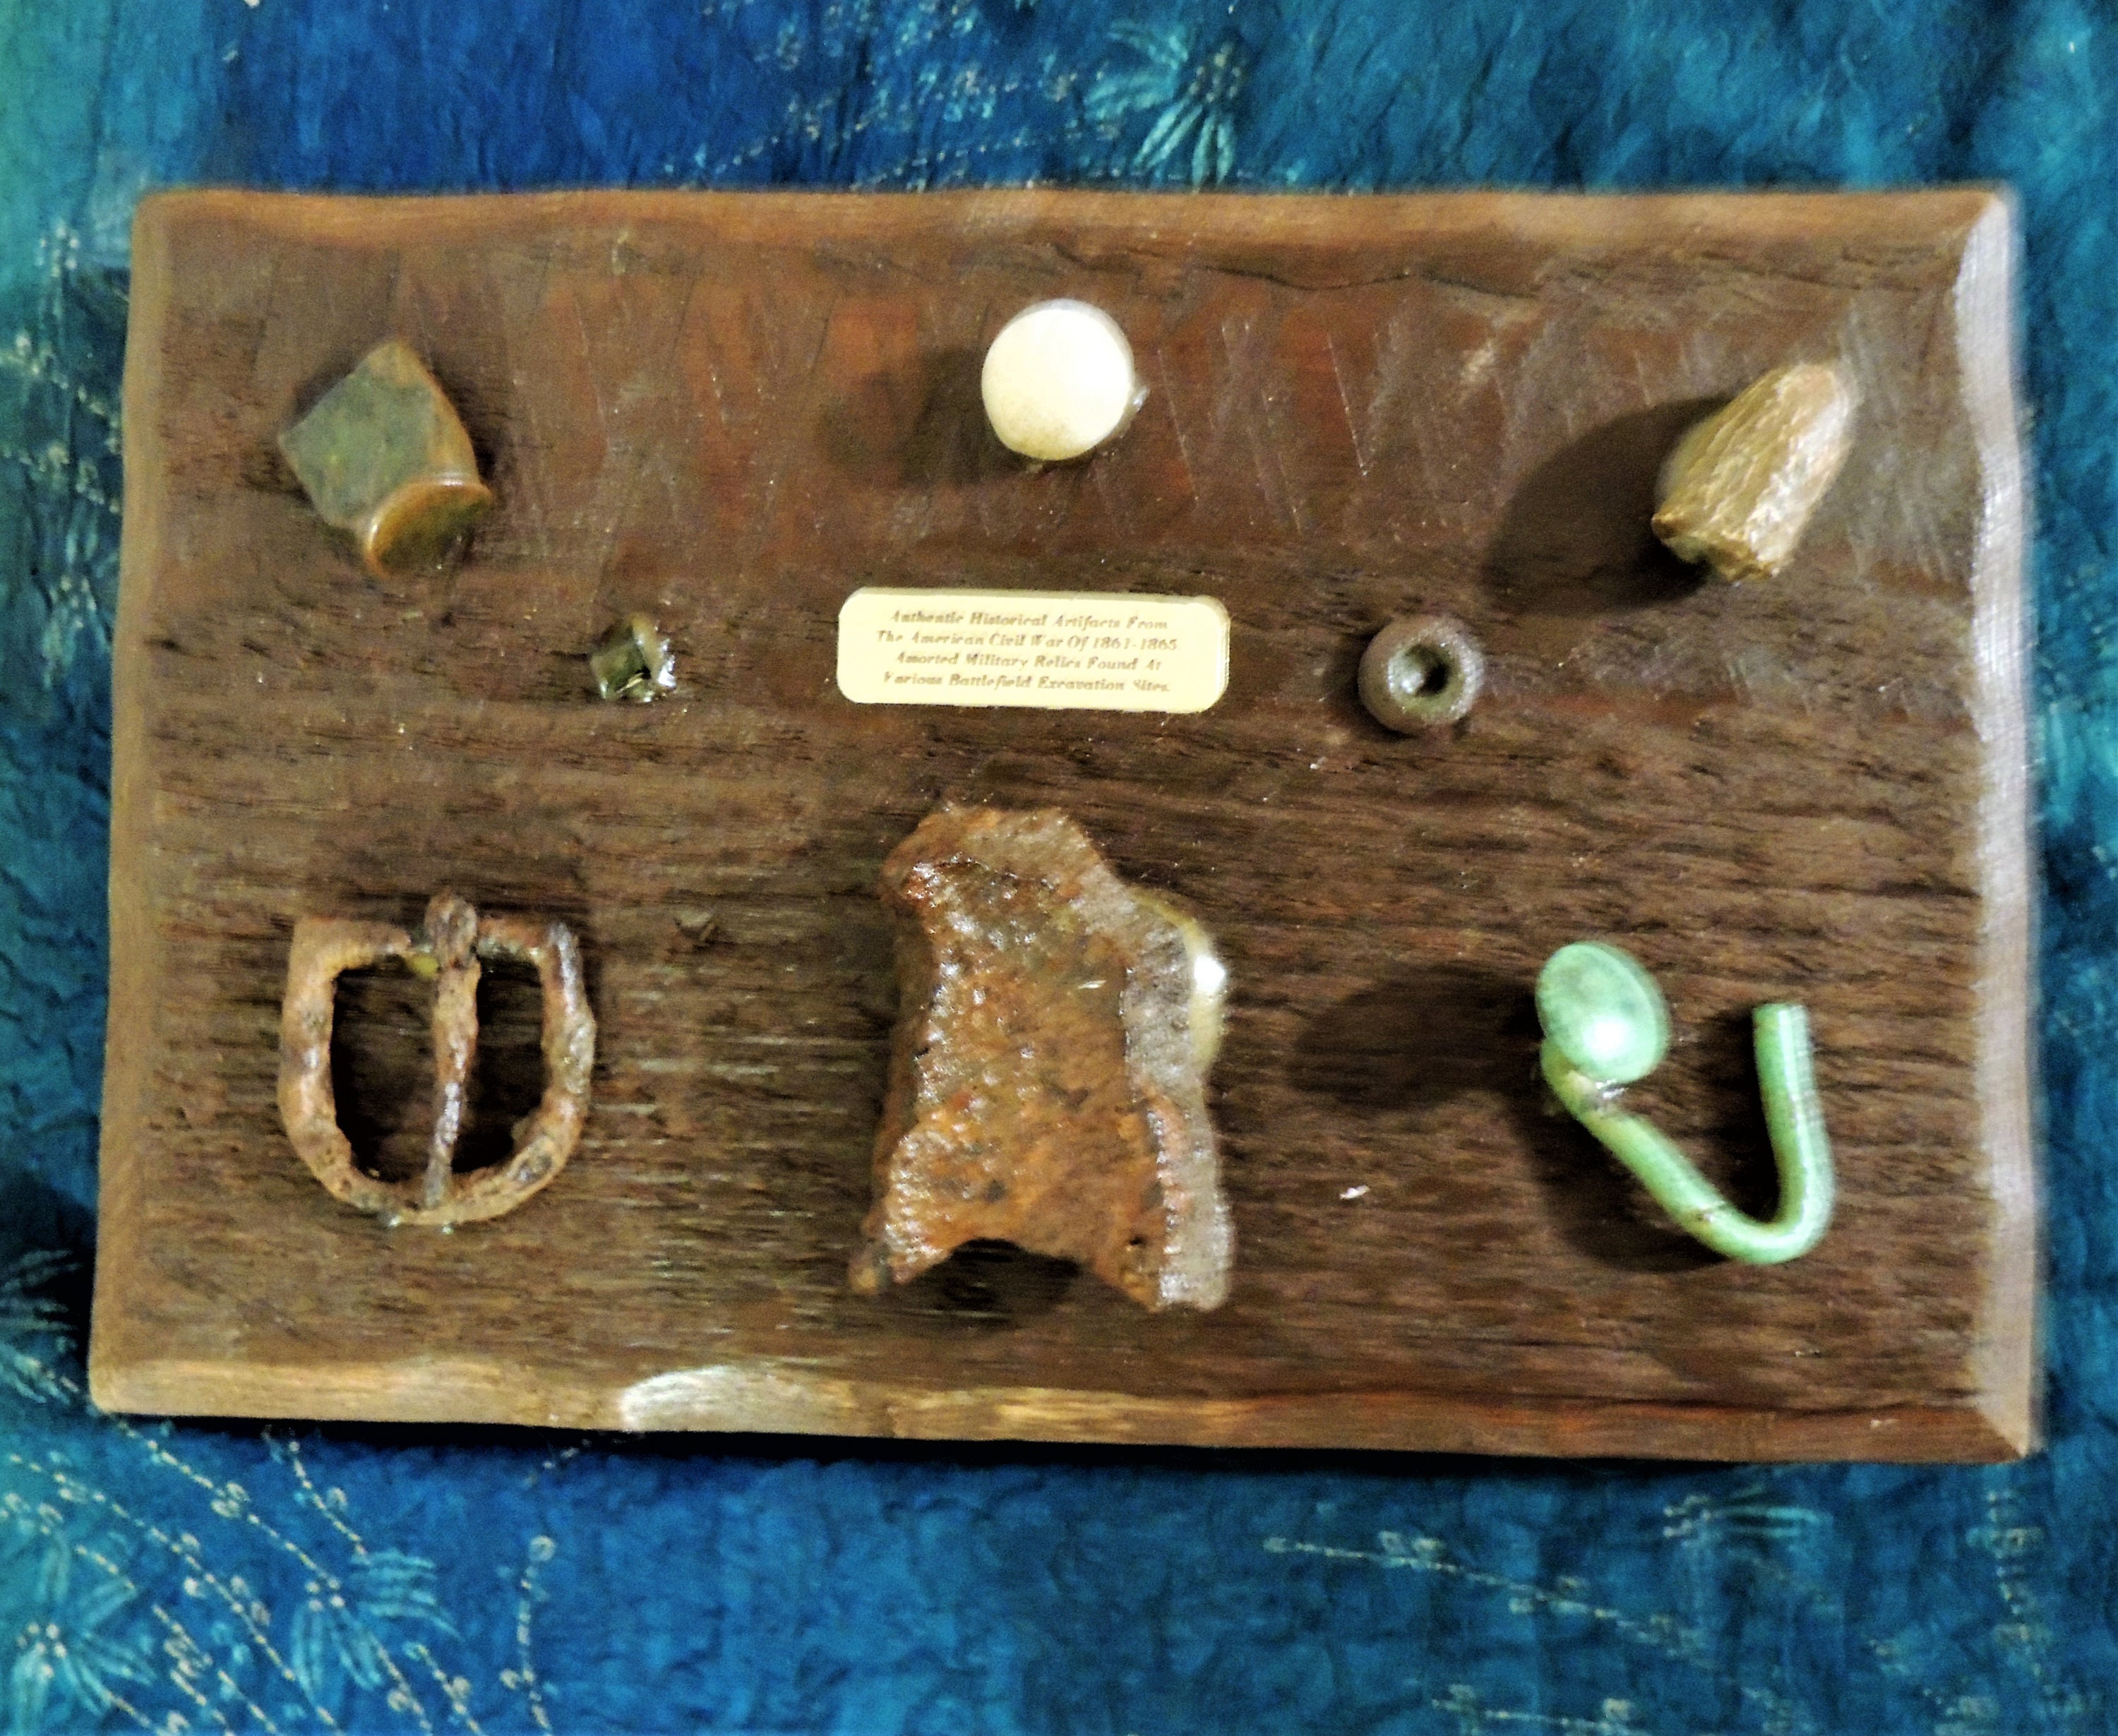 Leather Apothecary Kit / Sold  Civil War Artifacts - For Sale in